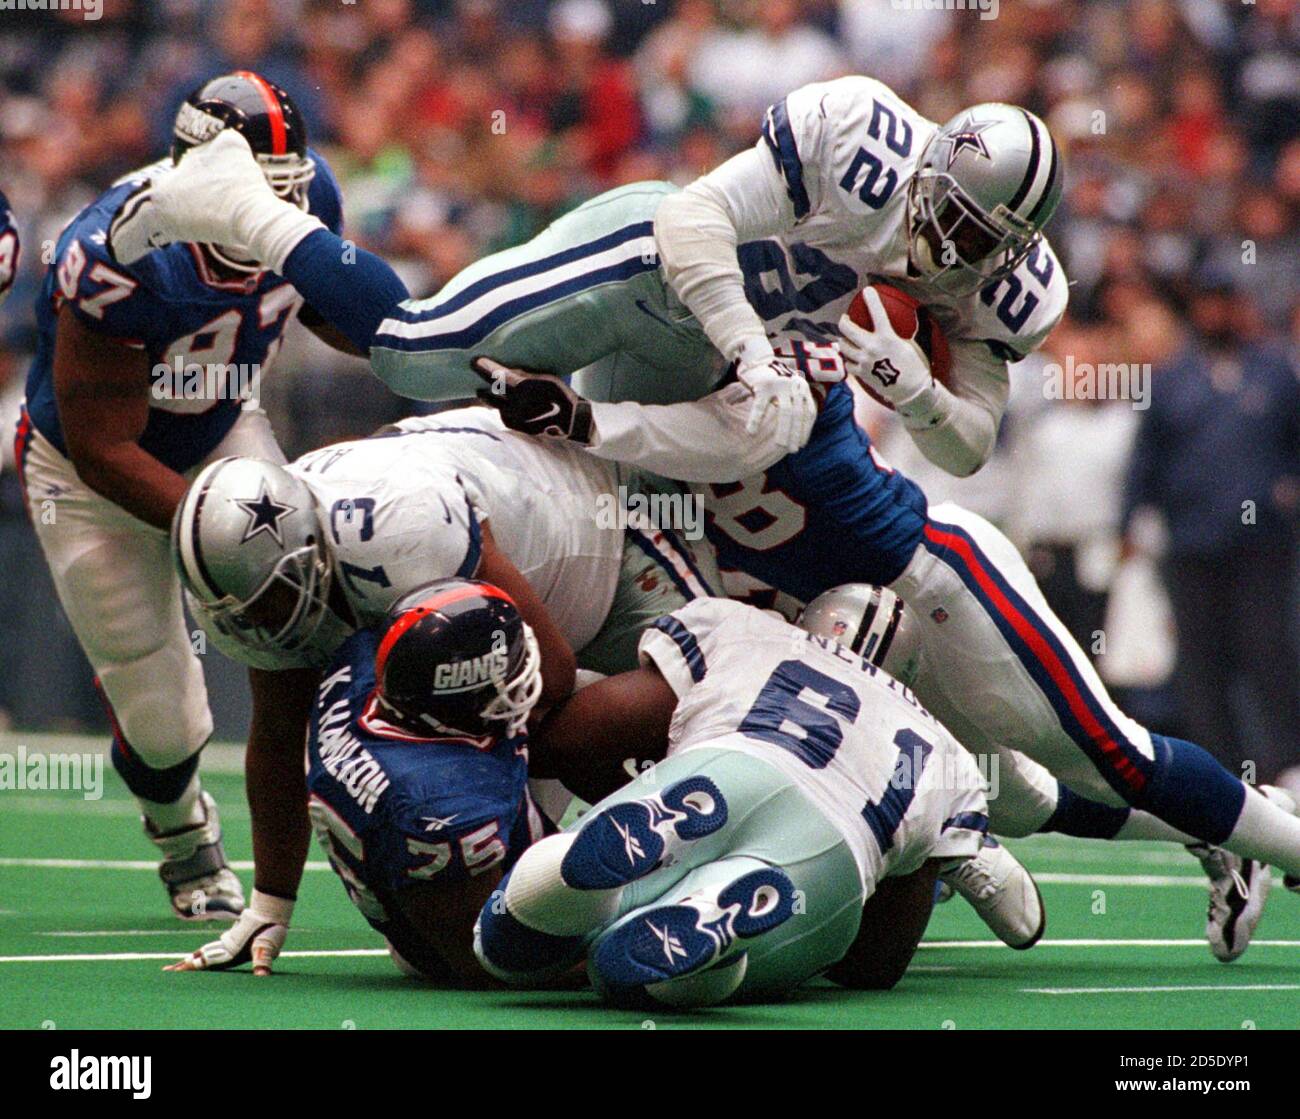 Dallas Cowboys Emmitt Smith takes to the air as New York Giants defenders  Jessie Armstead (R), Robert Harris (97) and Keith Hamilton (75) try to stop  him in the first quarter November